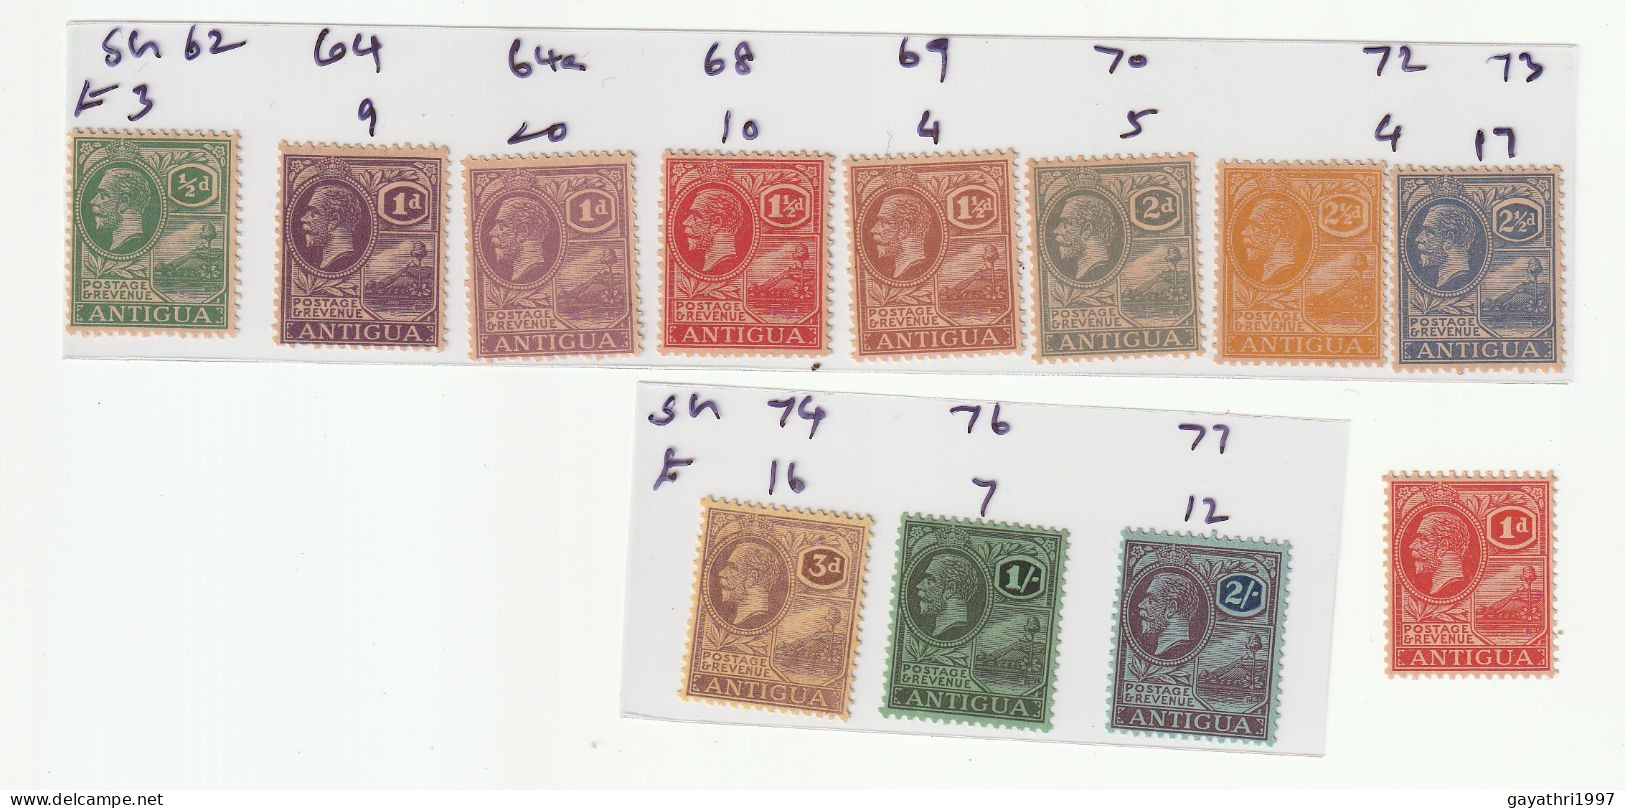 Antigua 1921 SG 62 -77 SET OF 12 STAMPS ( PART OF SET ) MINT MNH GOOD CONDITION (SH 90) - 1858-1960 Colonia Británica